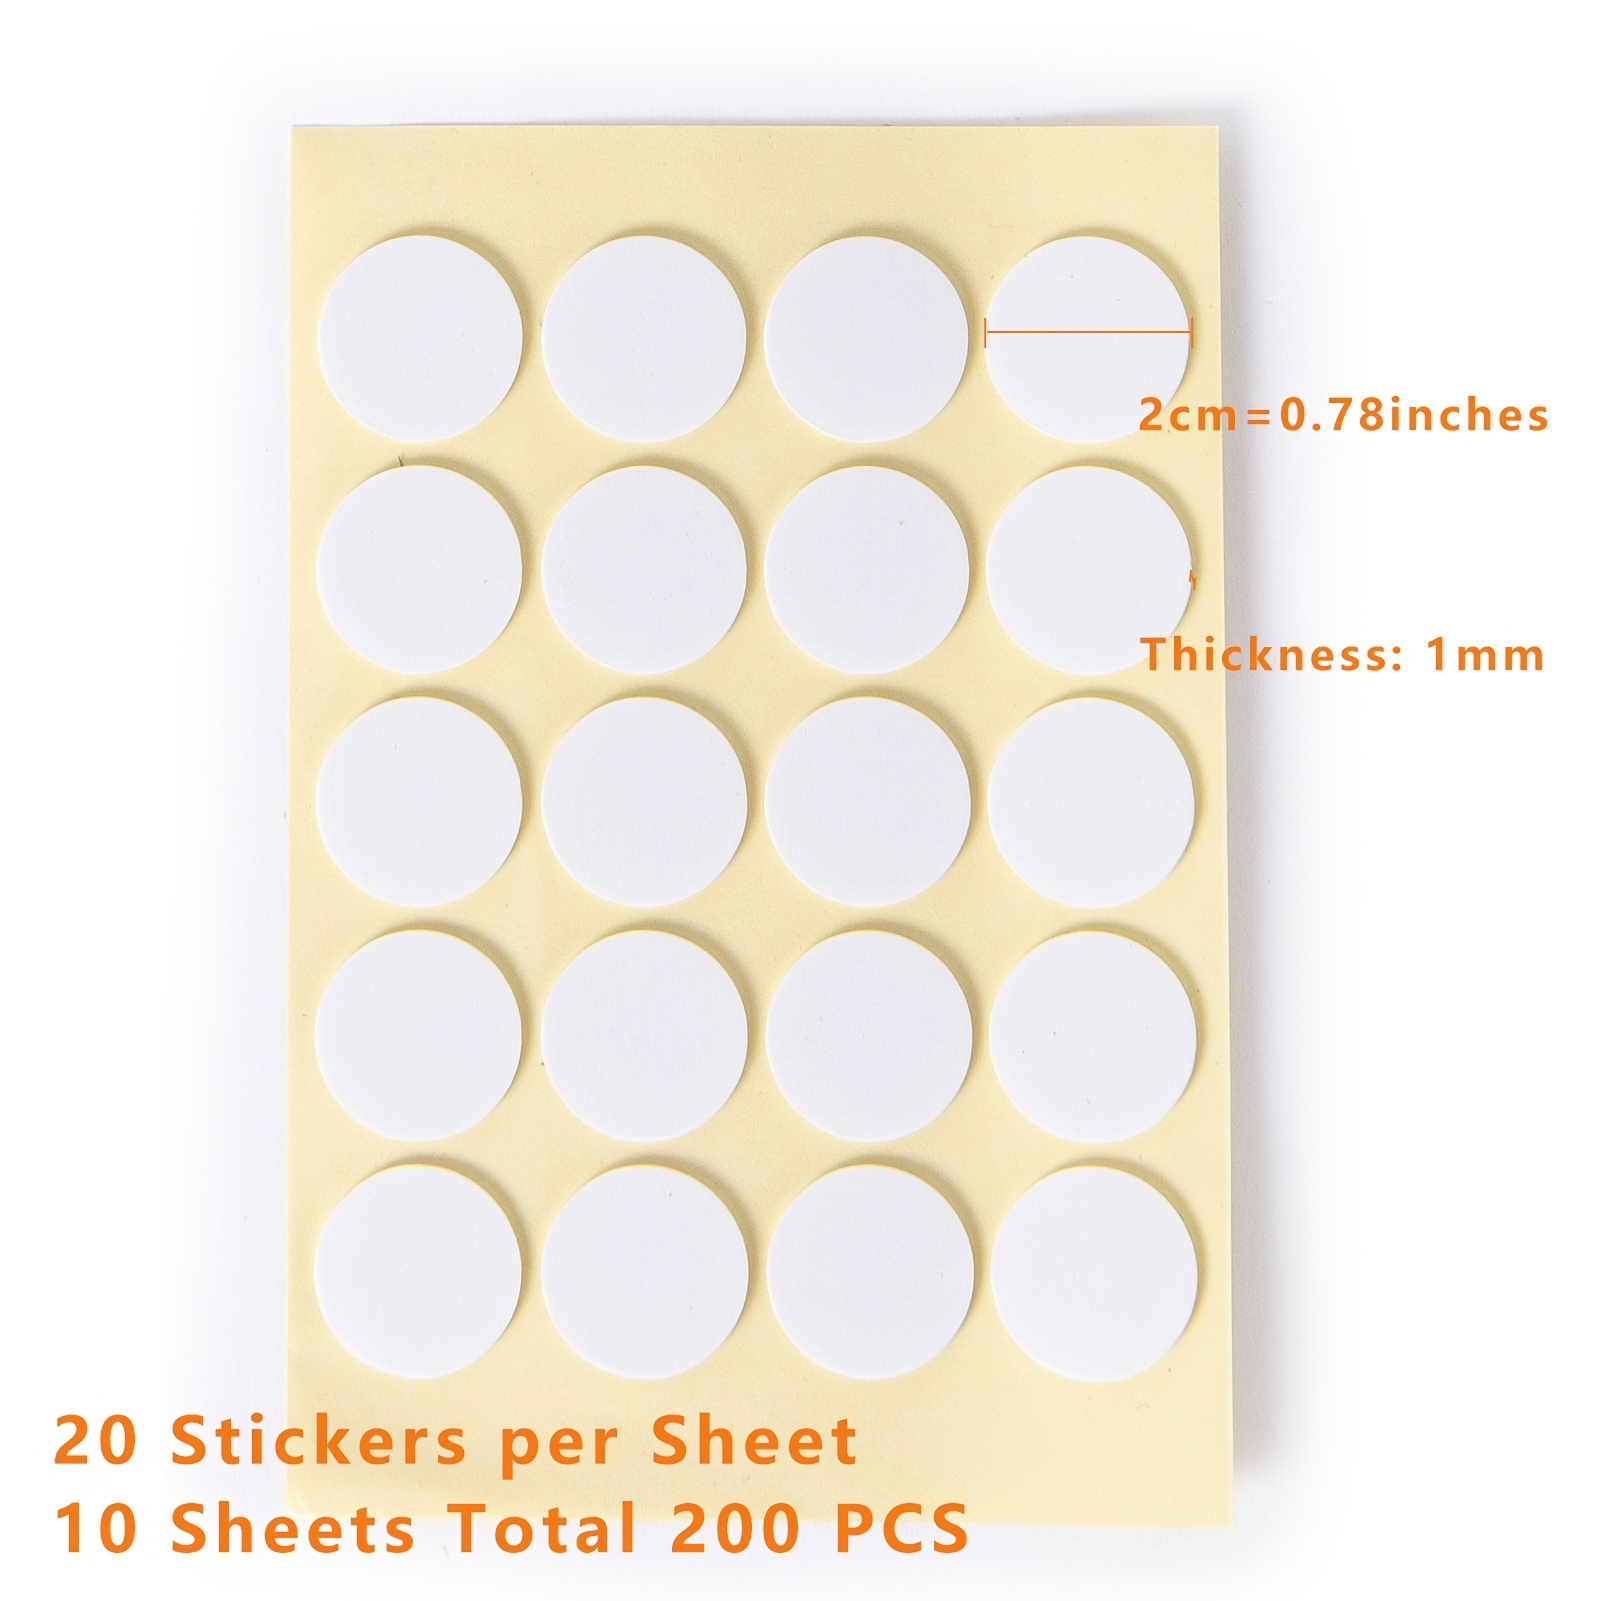 Aubeco 960pcs Candle Making Wick Stickers, Heat Resistance Double-Sided Wick Stickers with The Little ‘‘Tail’’, Adhere Steady in Hot Wax Stickers